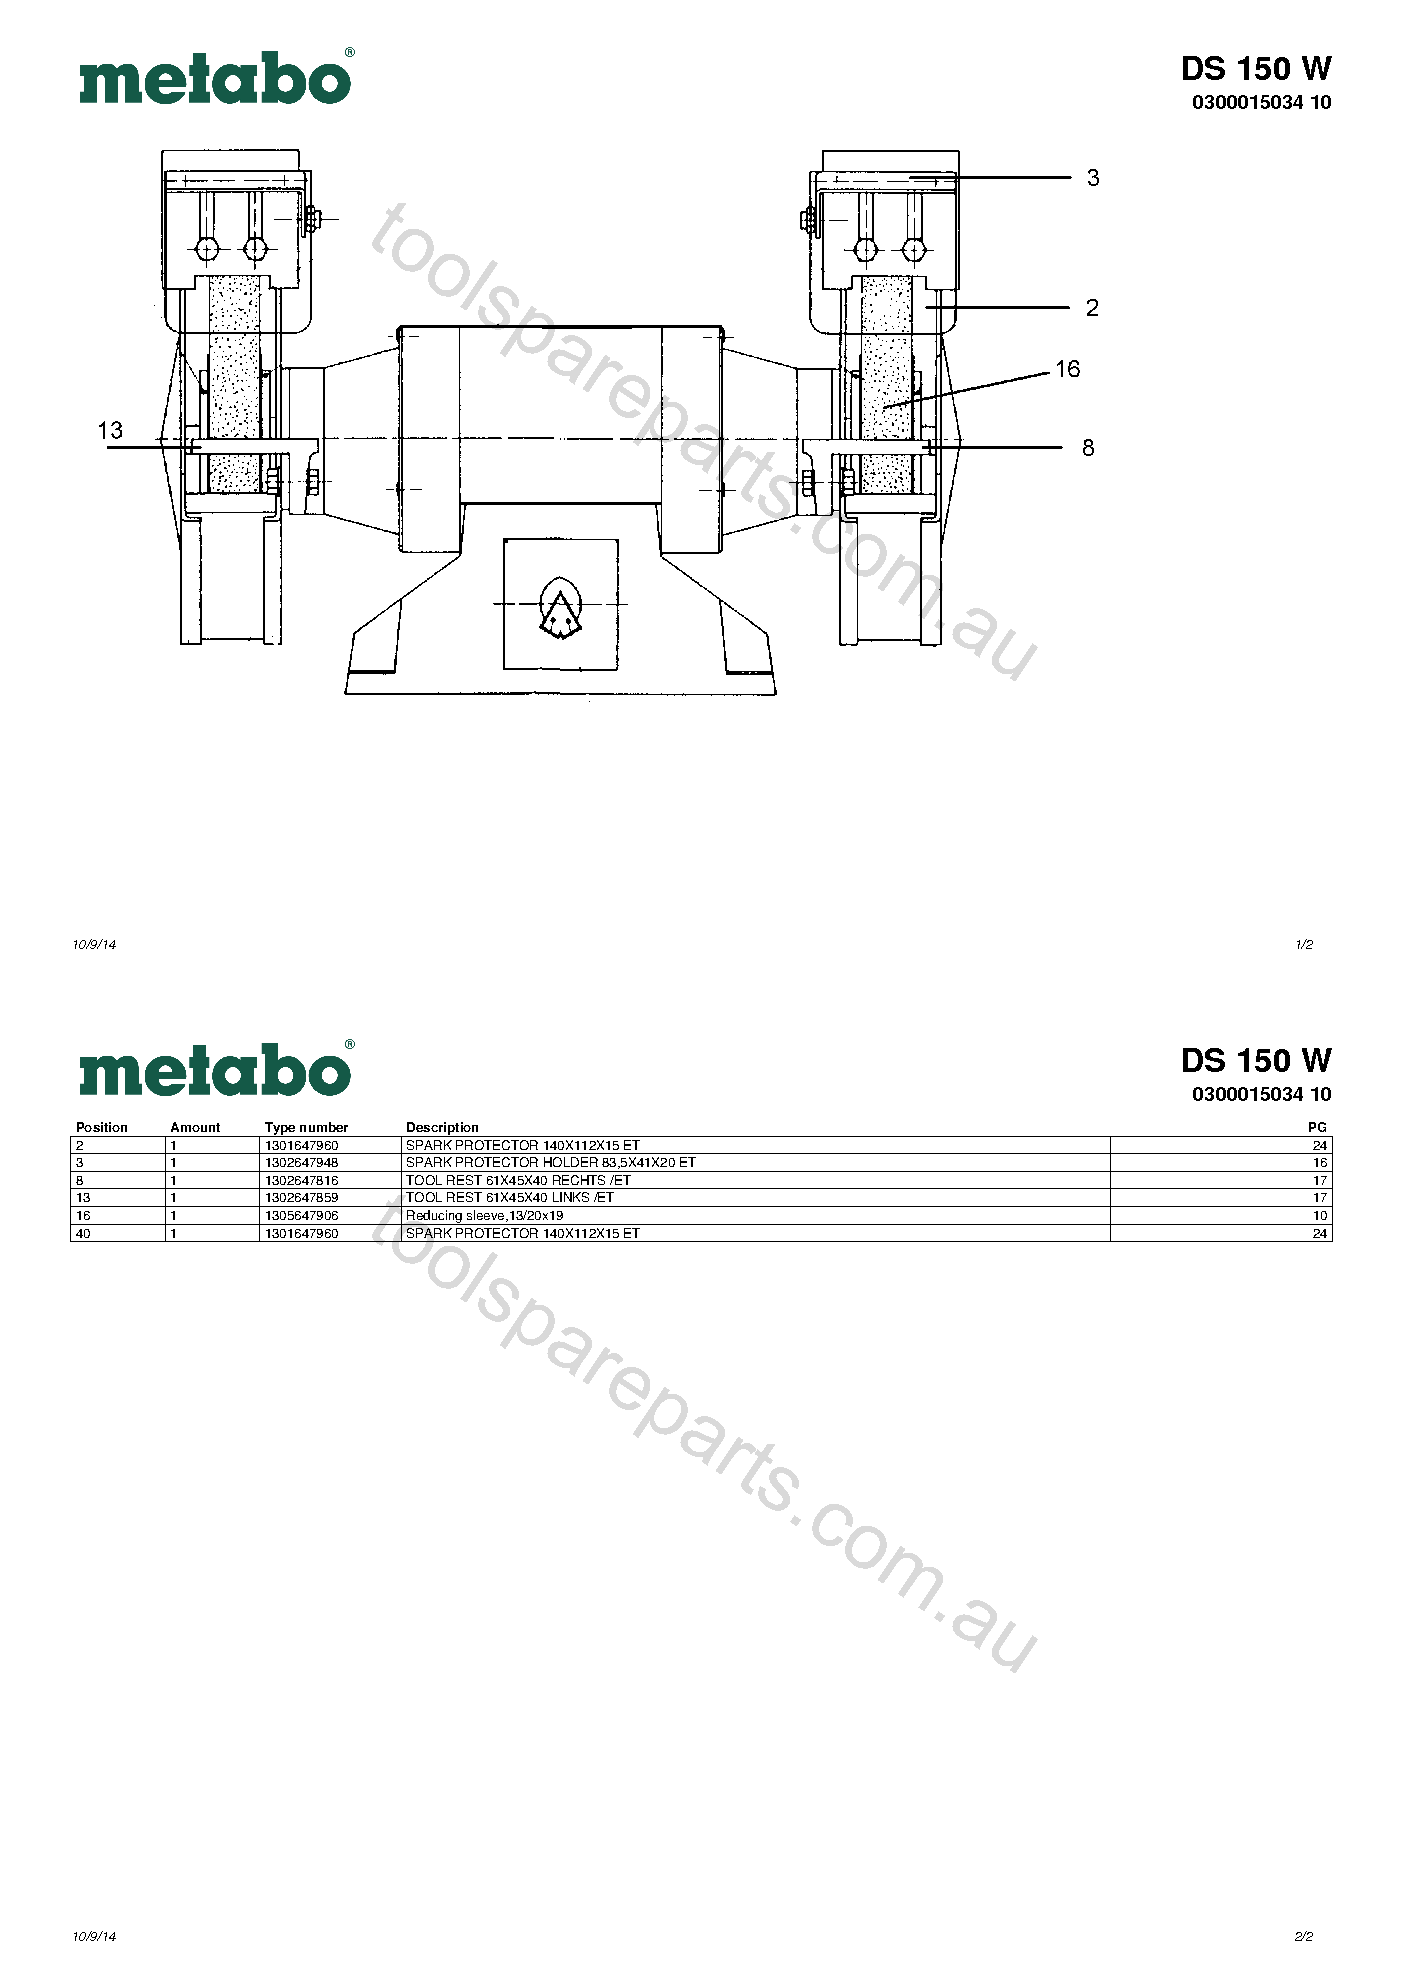 Metabo DS 150 W 0300015034 10  Diagram 1